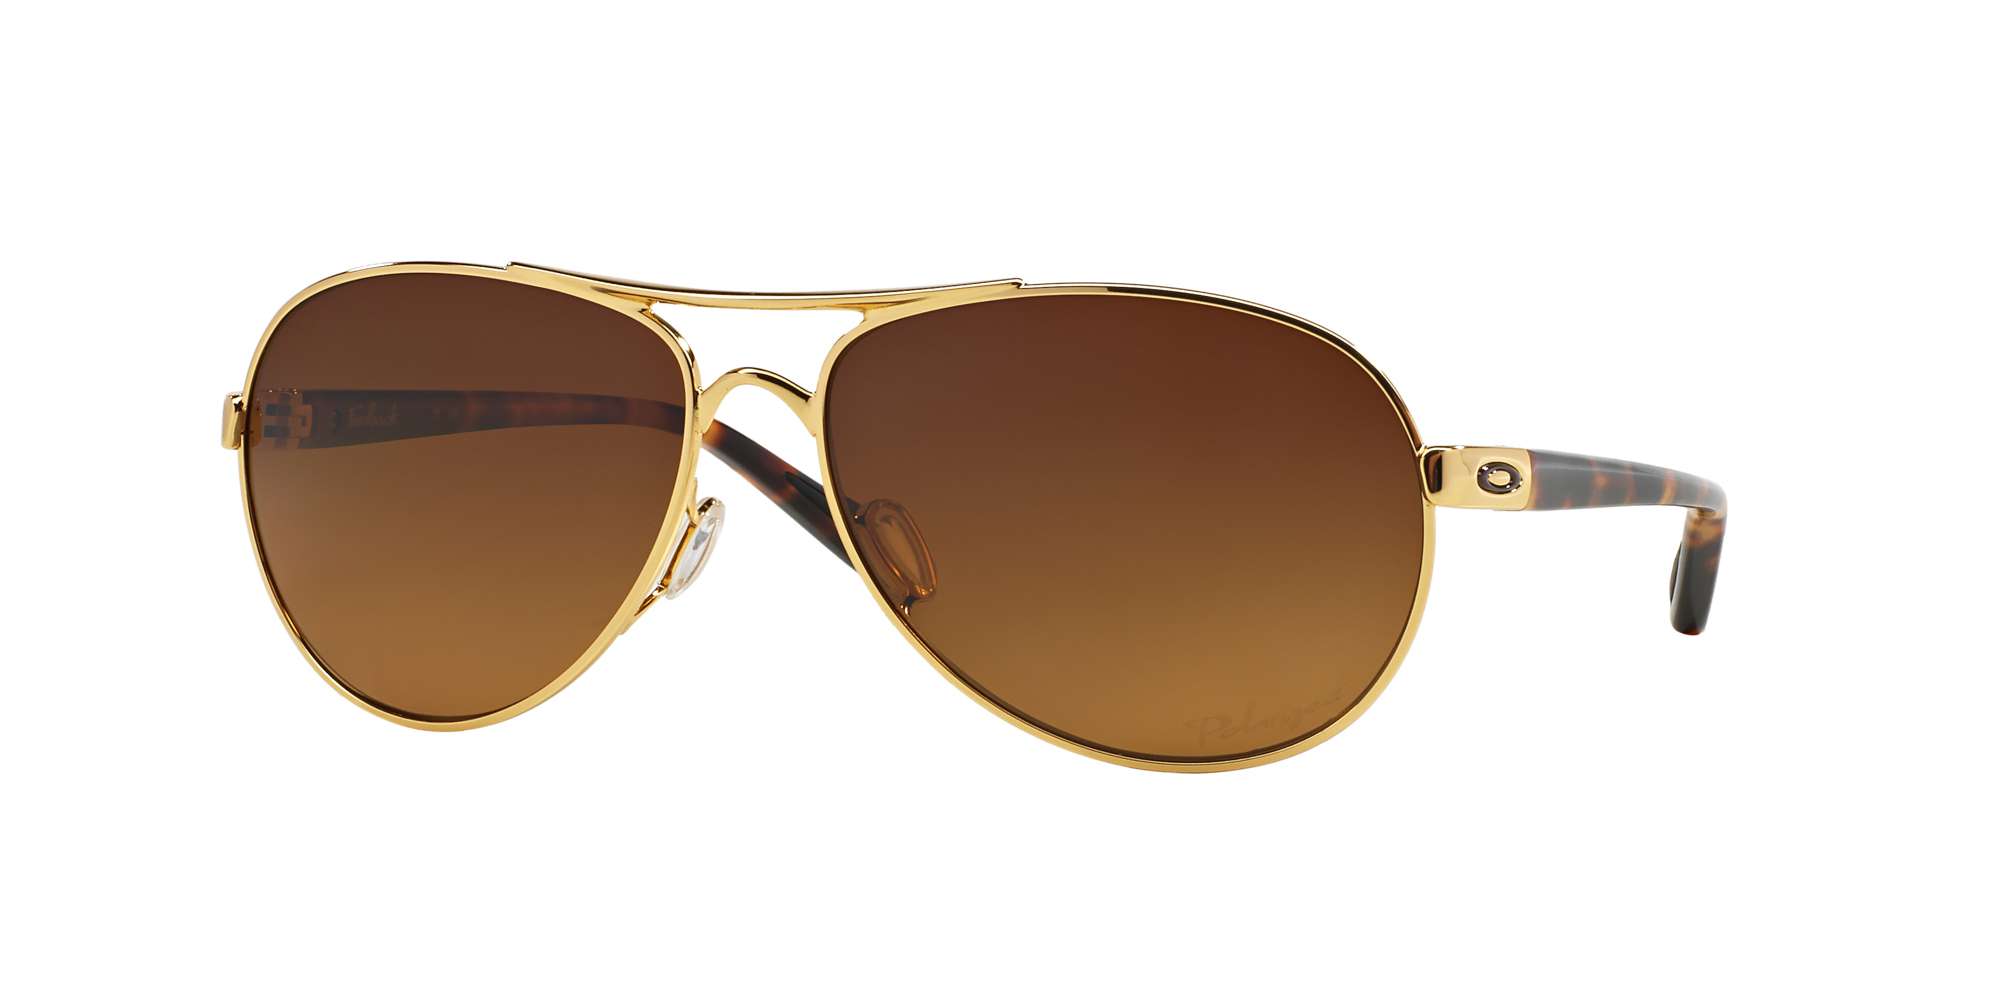 POLISHED GOLD / BROWN GRADIENT POLARIZED lenses